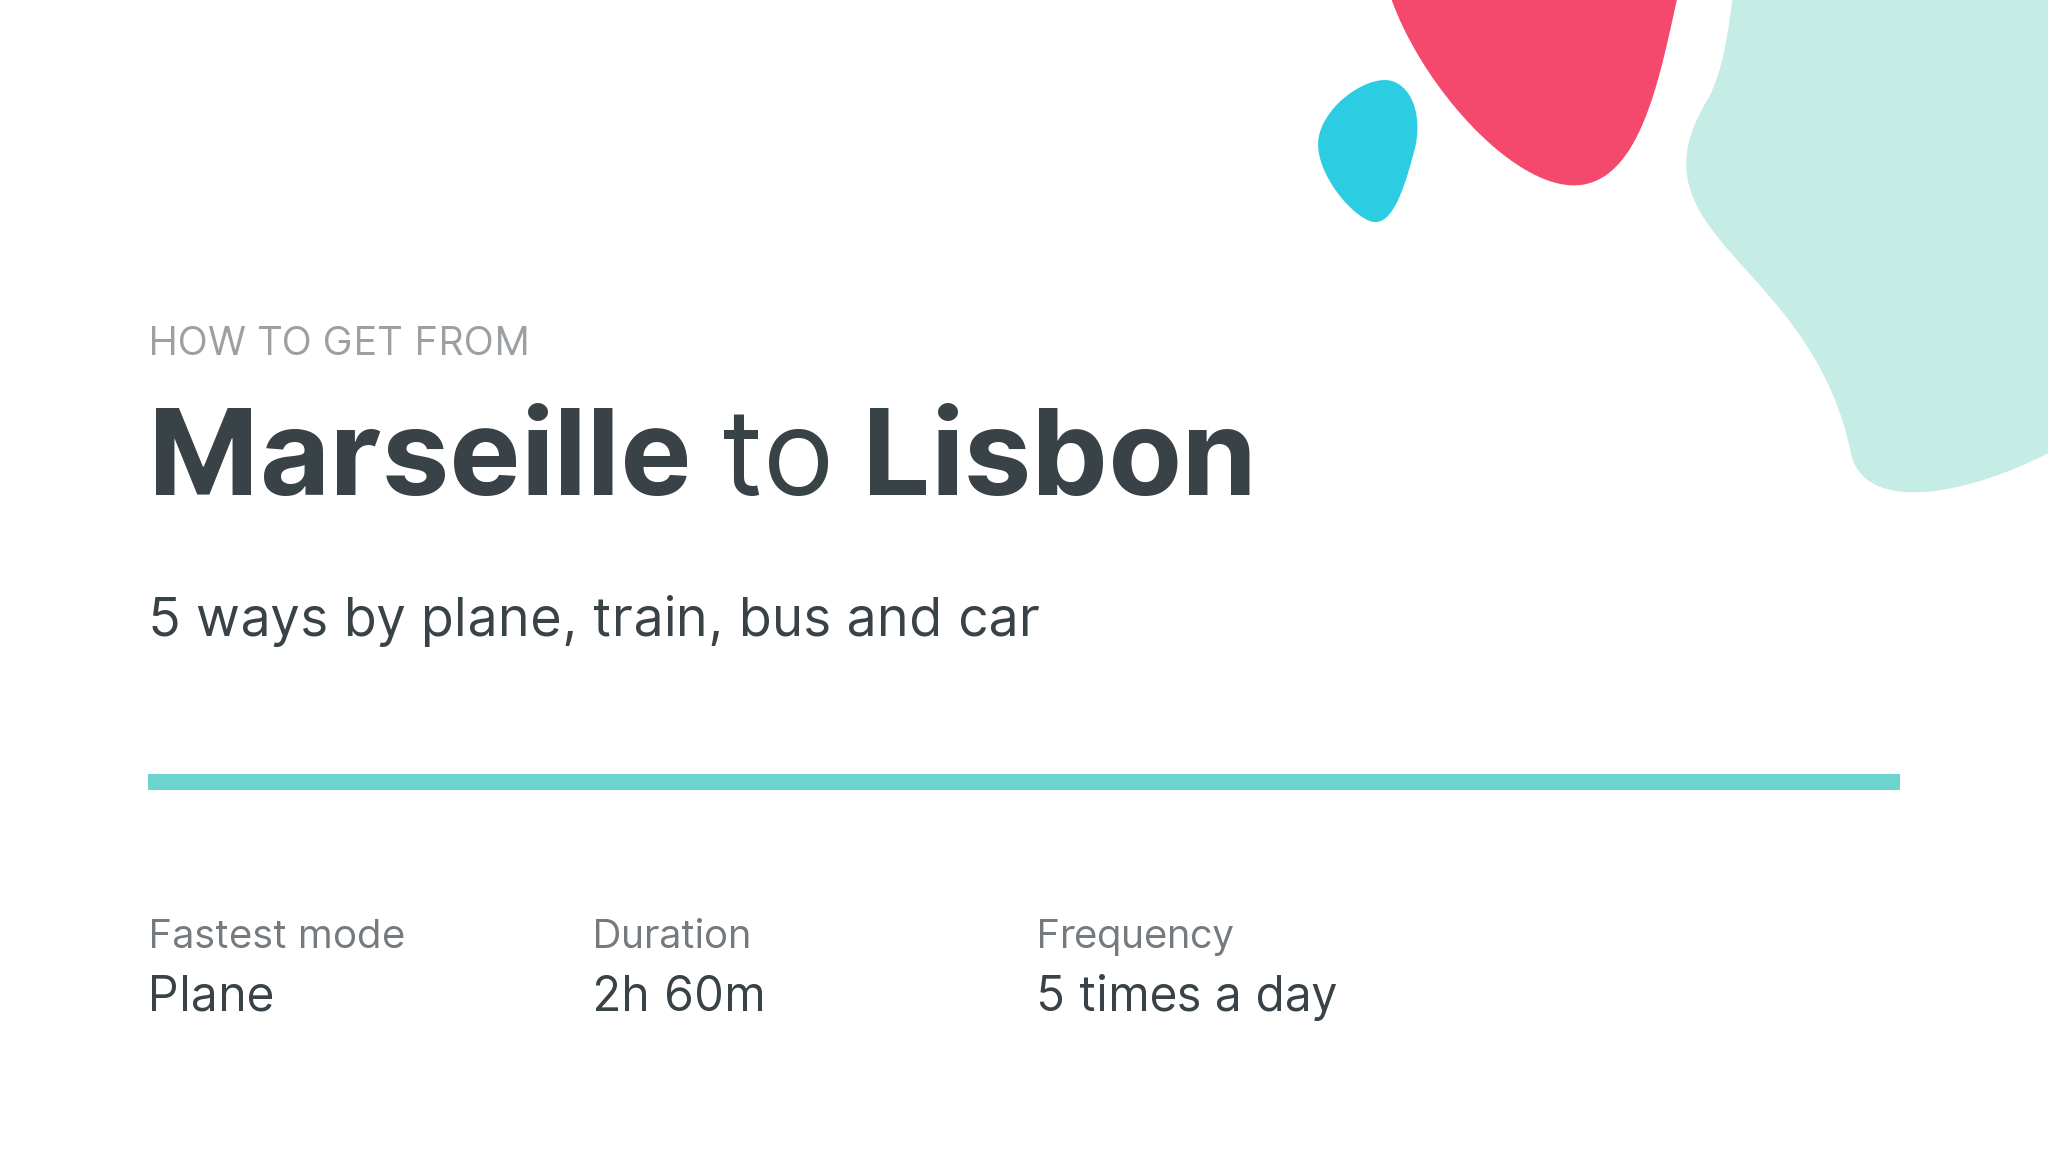 How do I get from Marseille to Lisbon